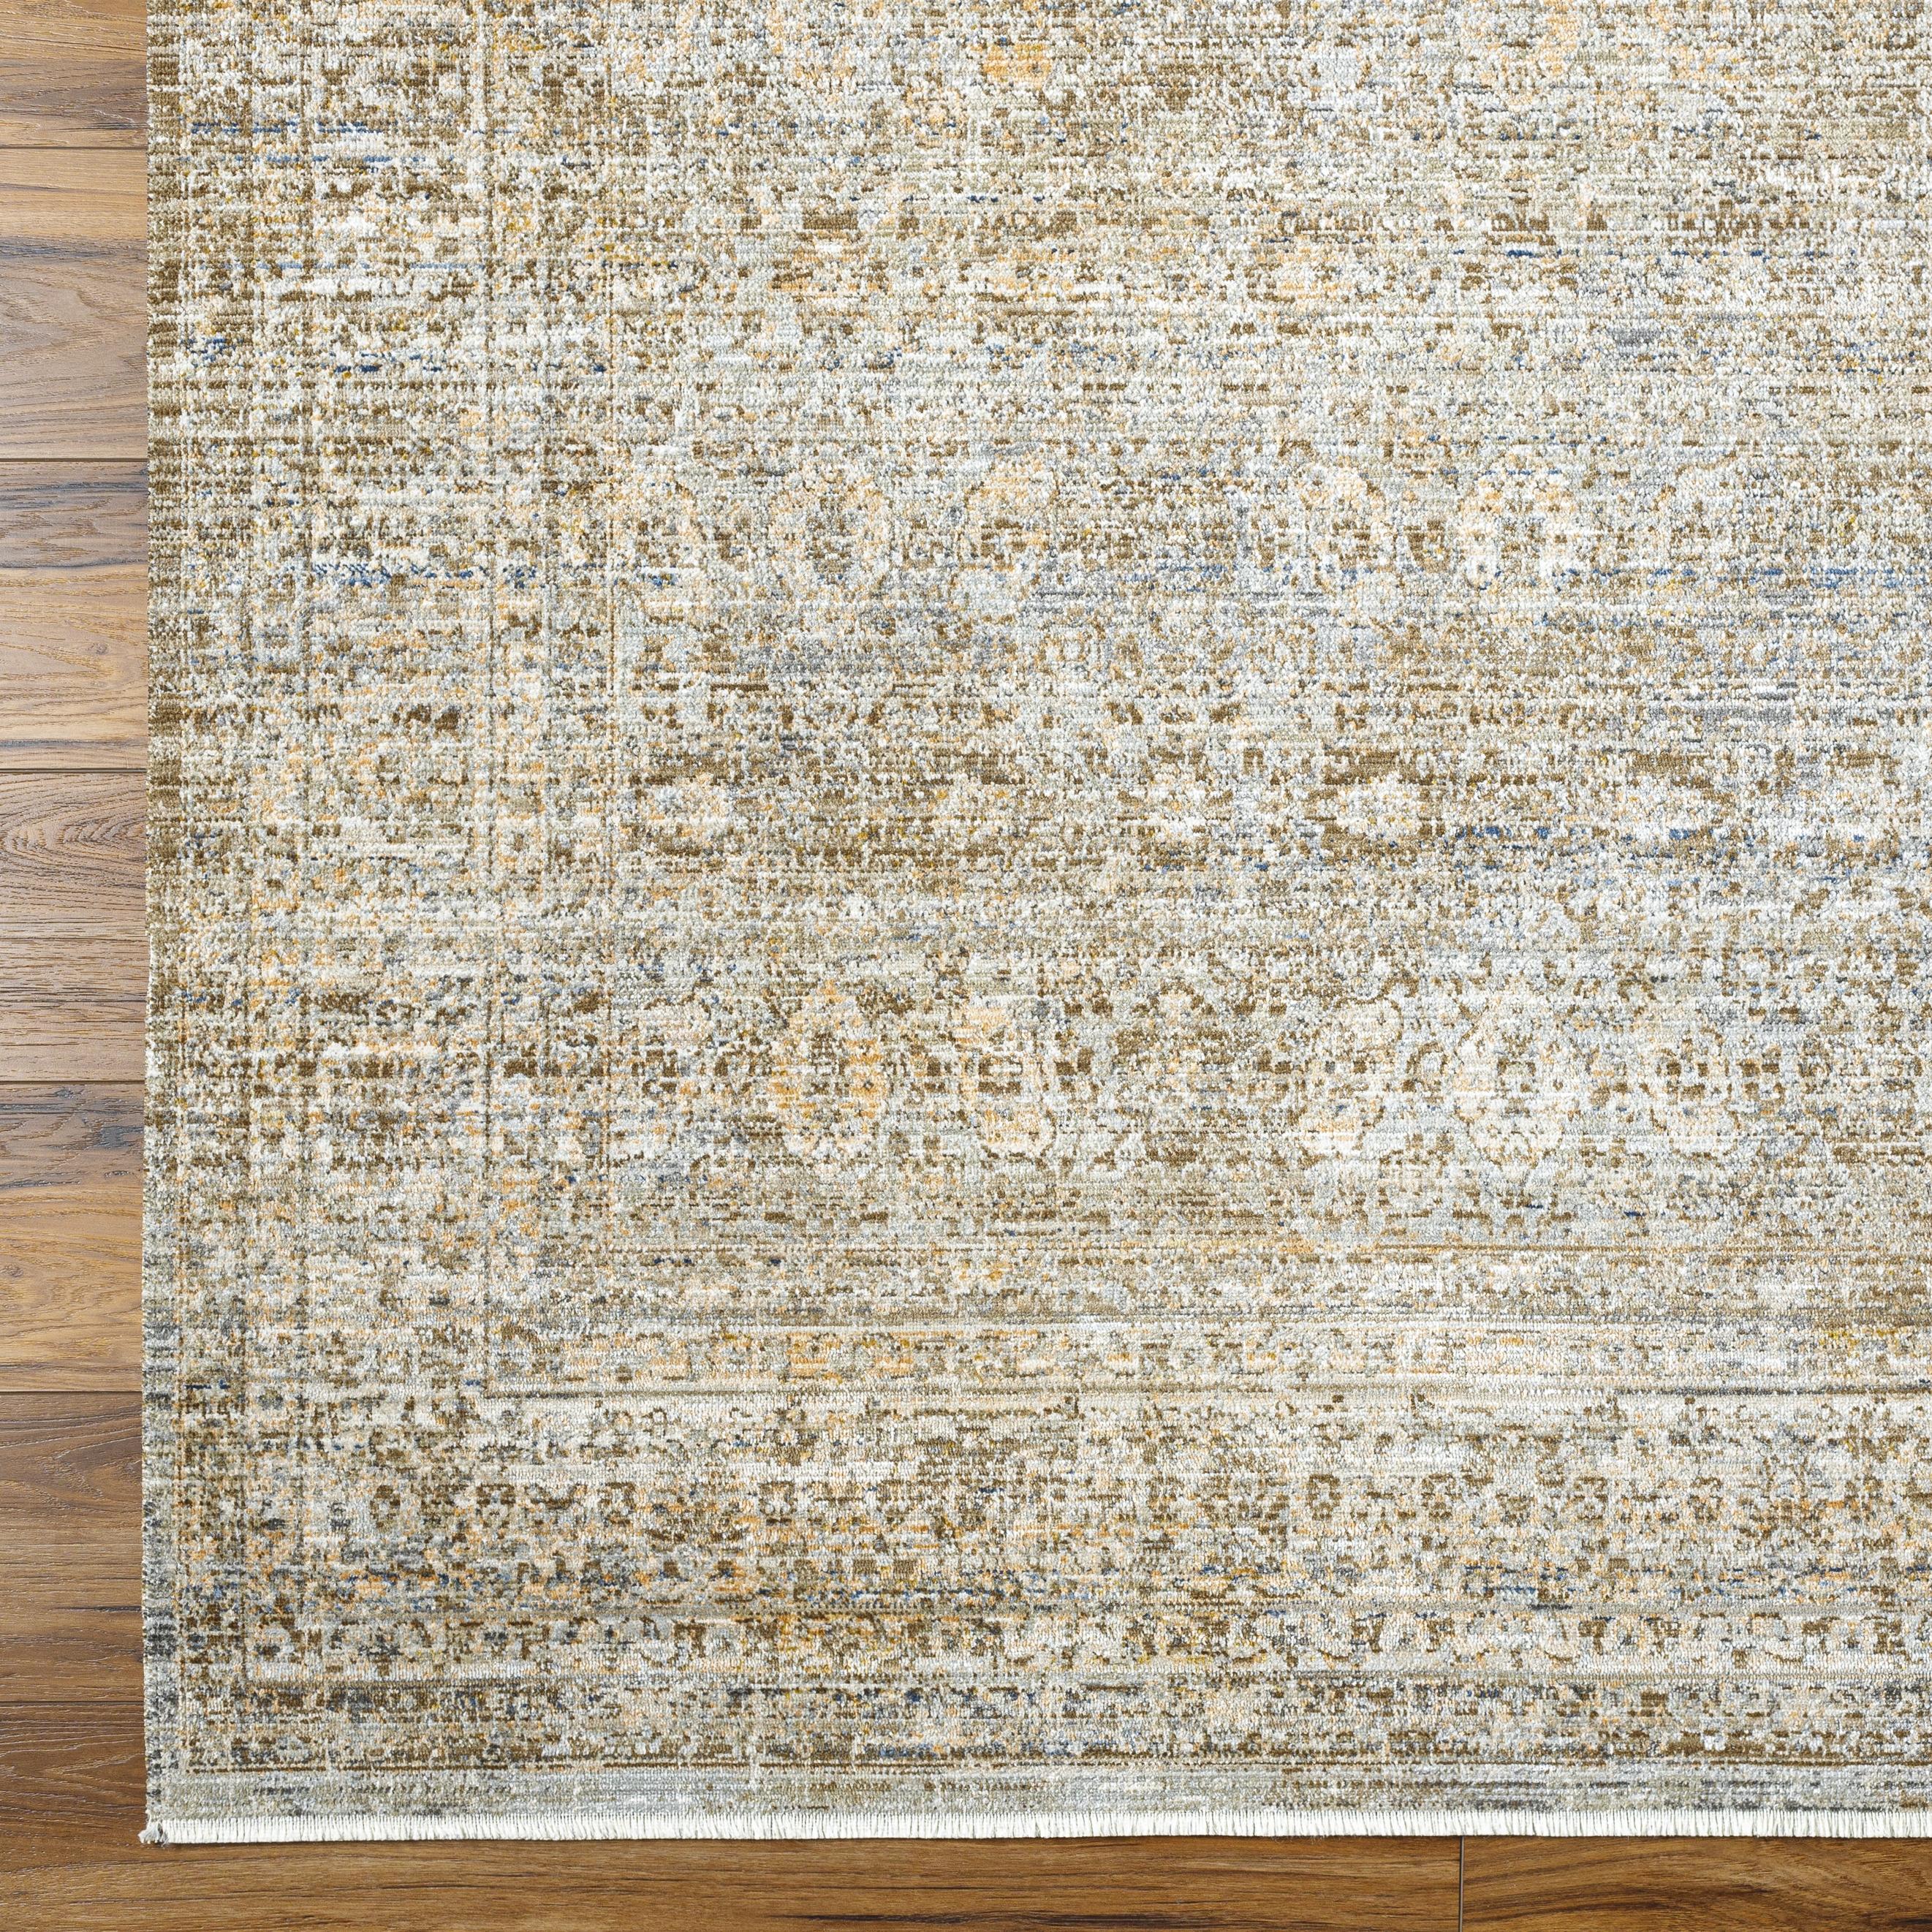 Introducing the Margaret area rug, a stunning collaboration between Surya and Becki Owens! This unique piece is sure to bring a touch of elegance to any room. Amethyst Home provides interior design, new home construction design consulting, vintage area rugs, and lighting in the Portland metro area.